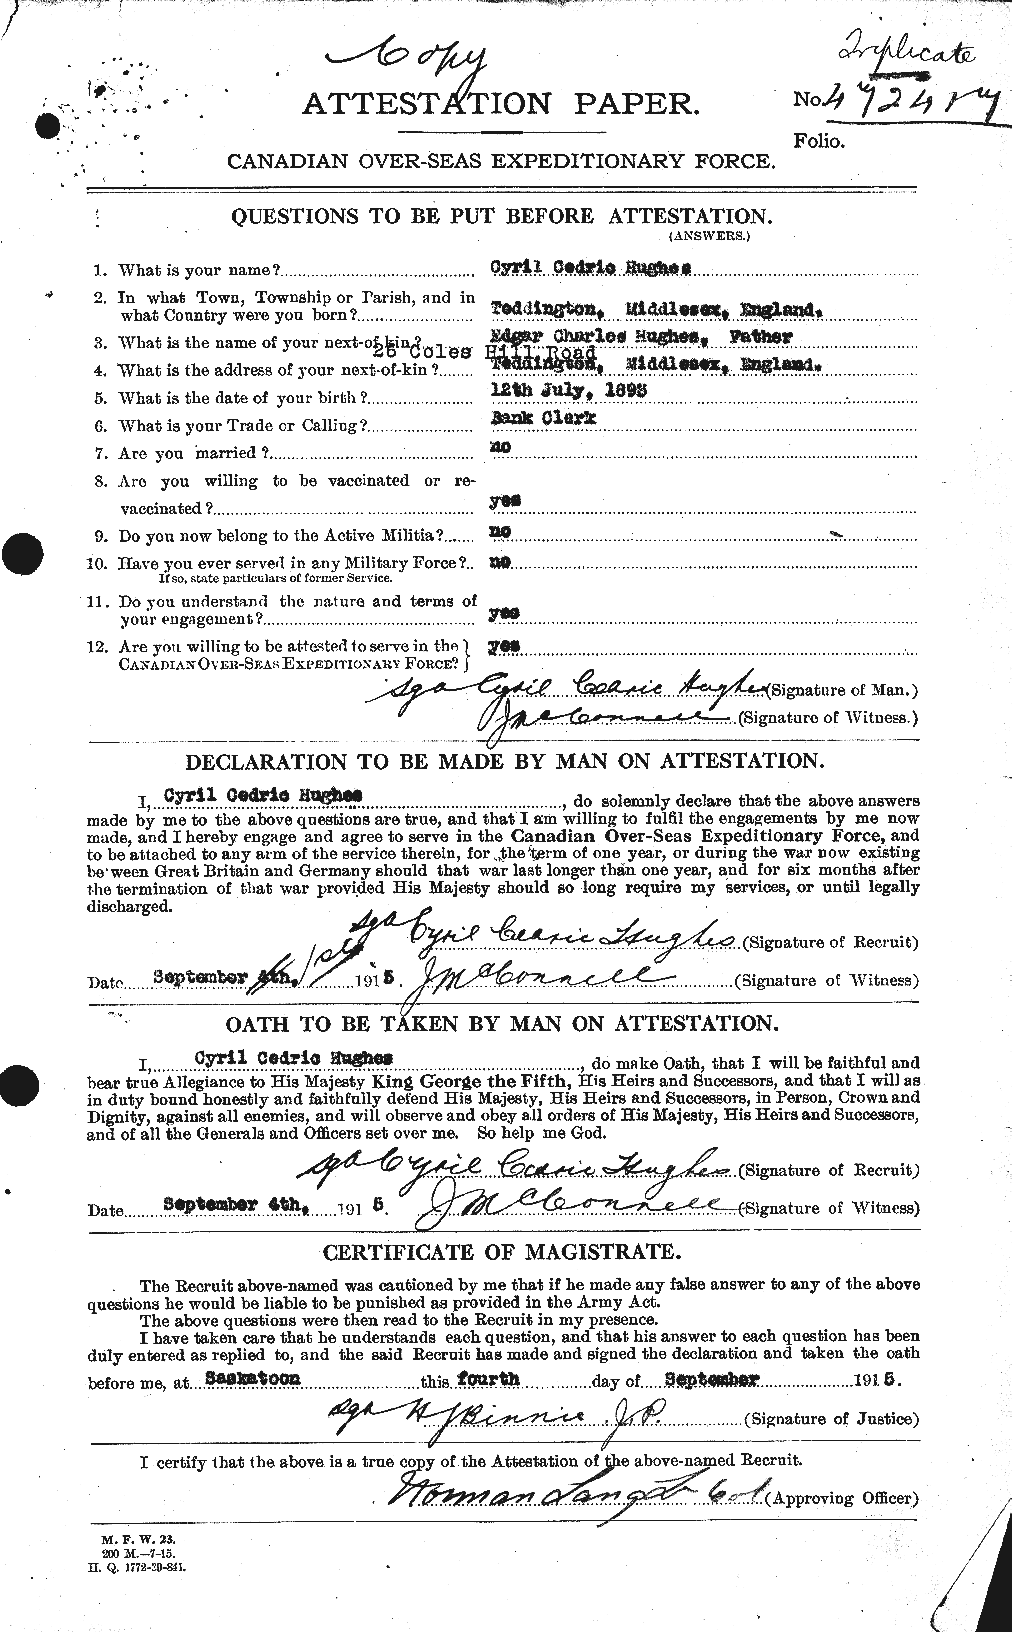 Personnel Records of the First World War - CEF 402636a